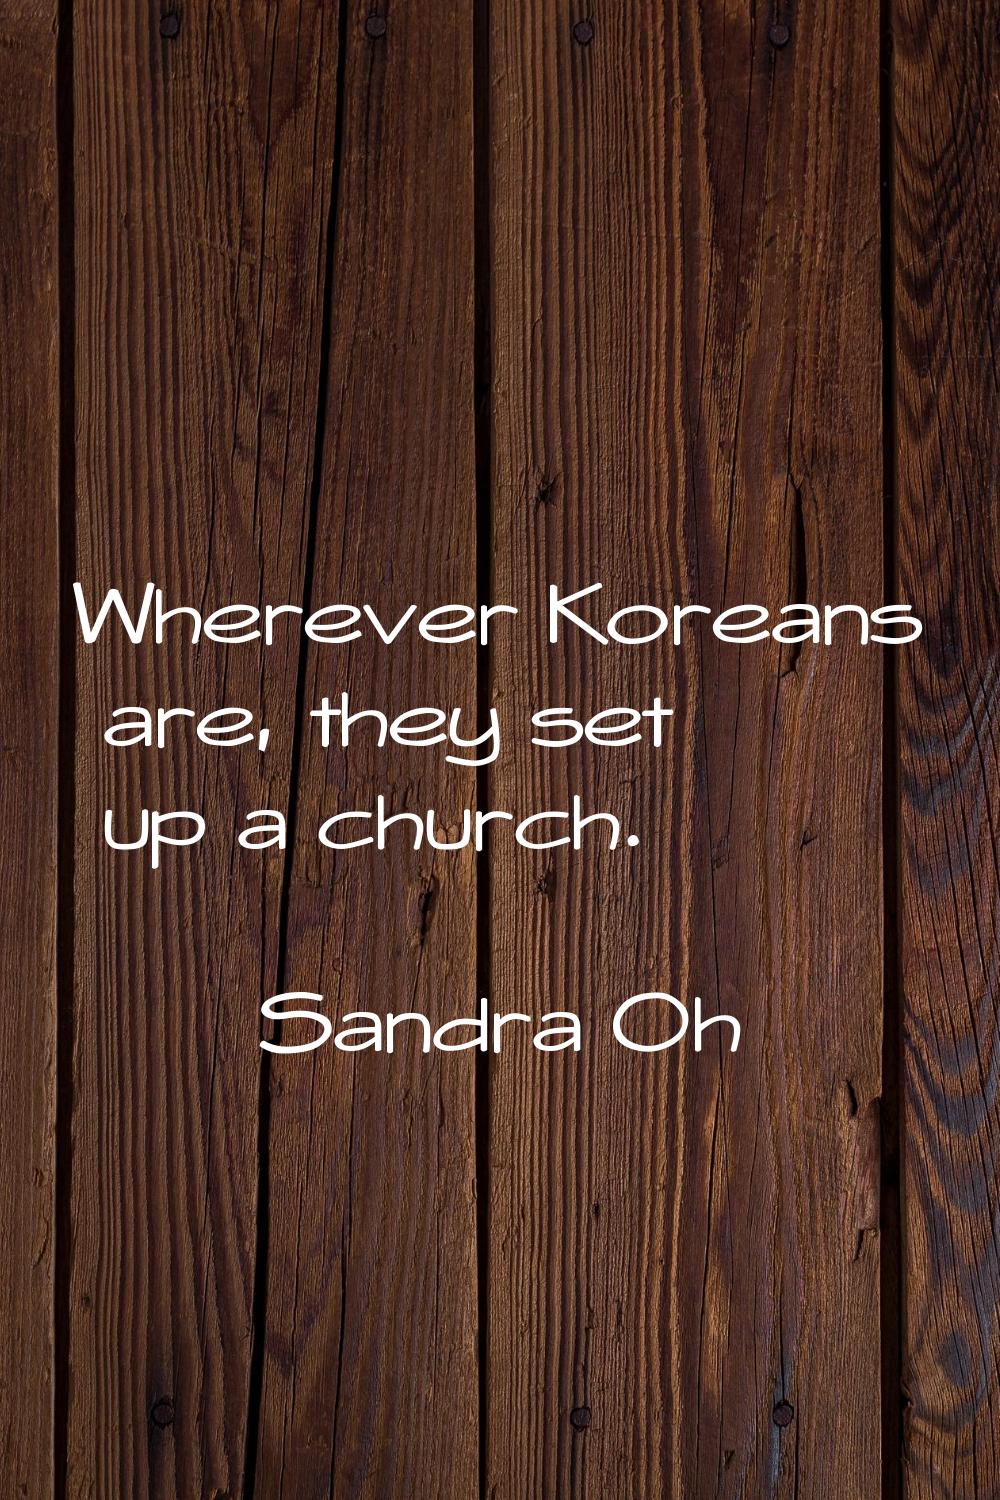 Wherever Koreans are, they set up a church.